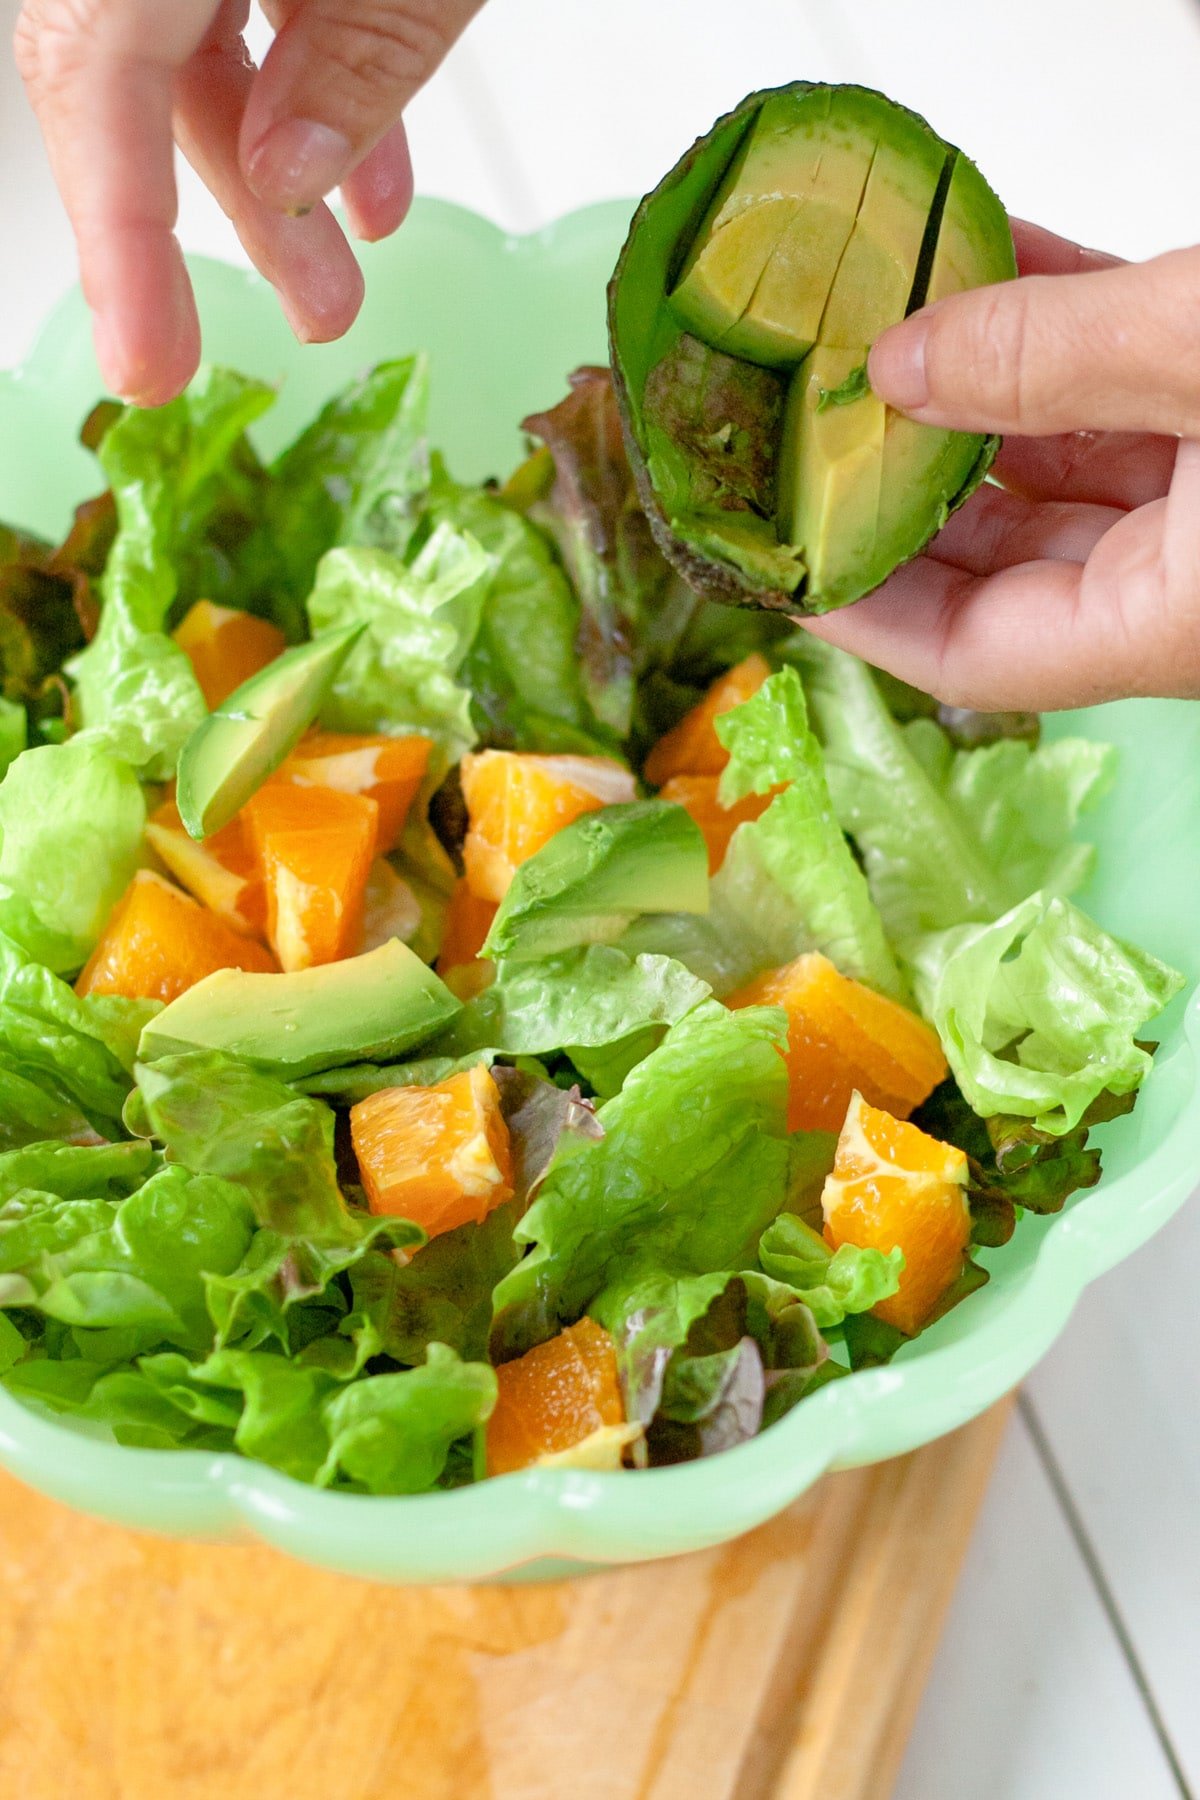 A bowl of salad with a hand sprinkling on chunks of avocado